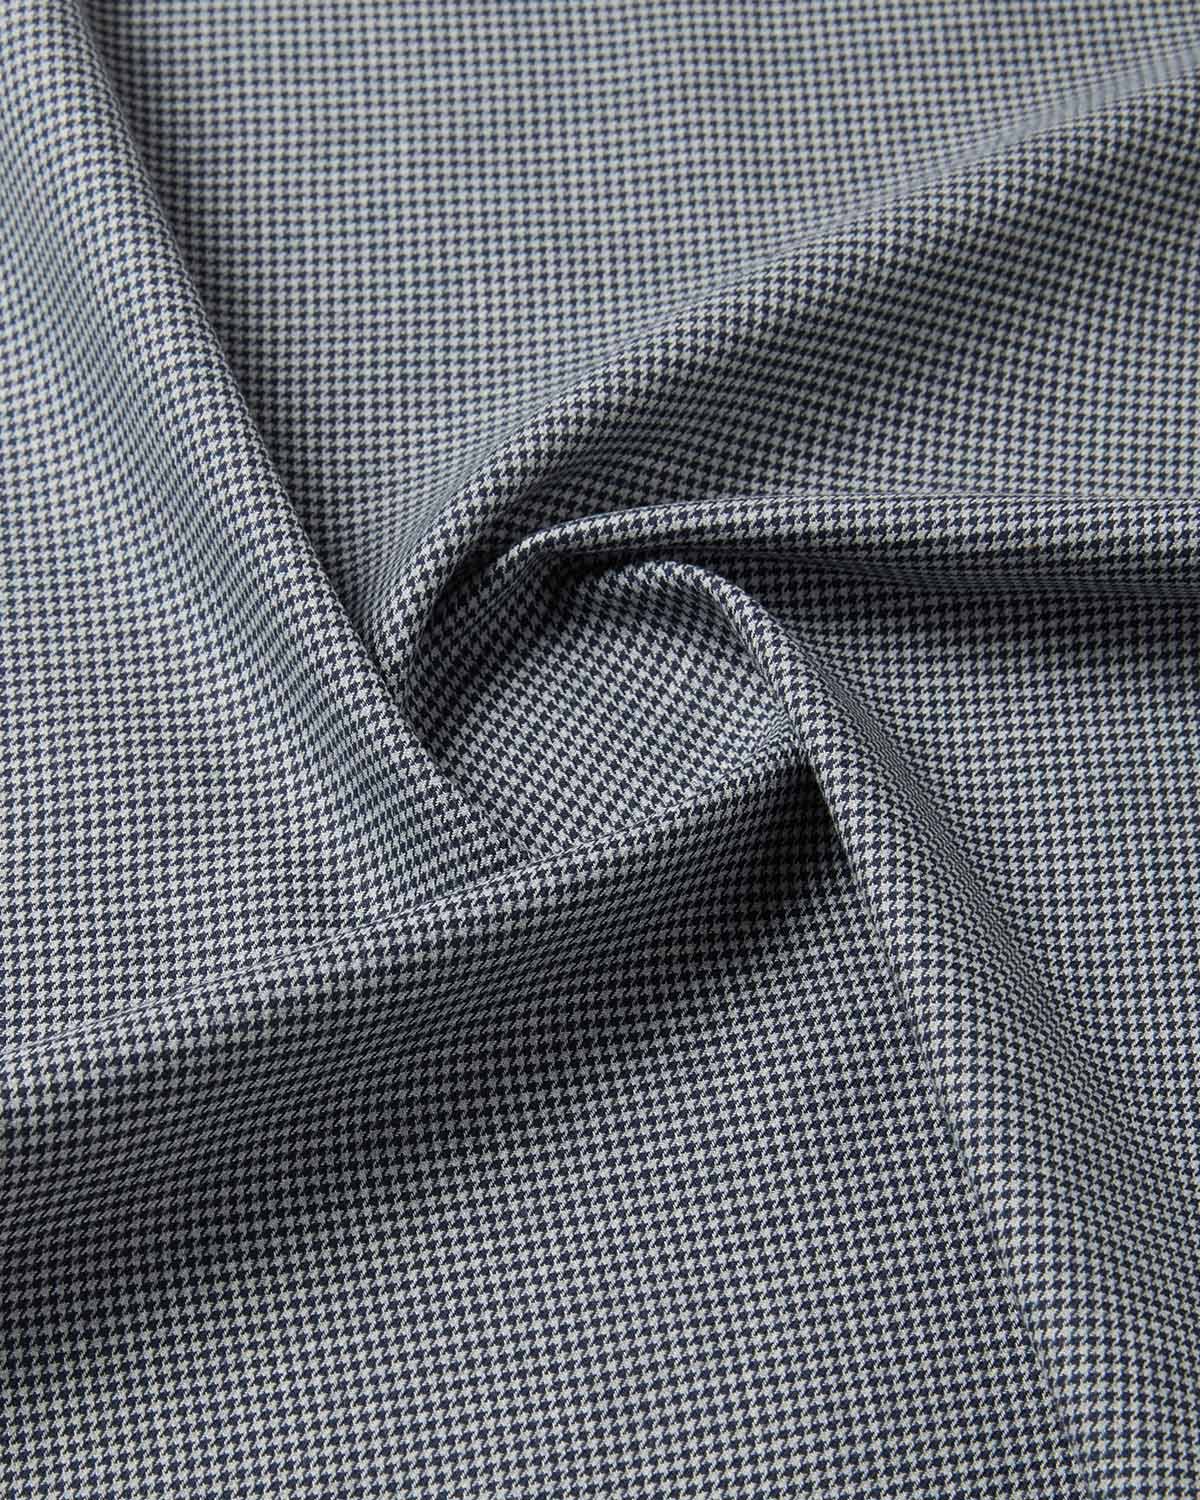 Japanese Nepelung Houndstooth Shirt